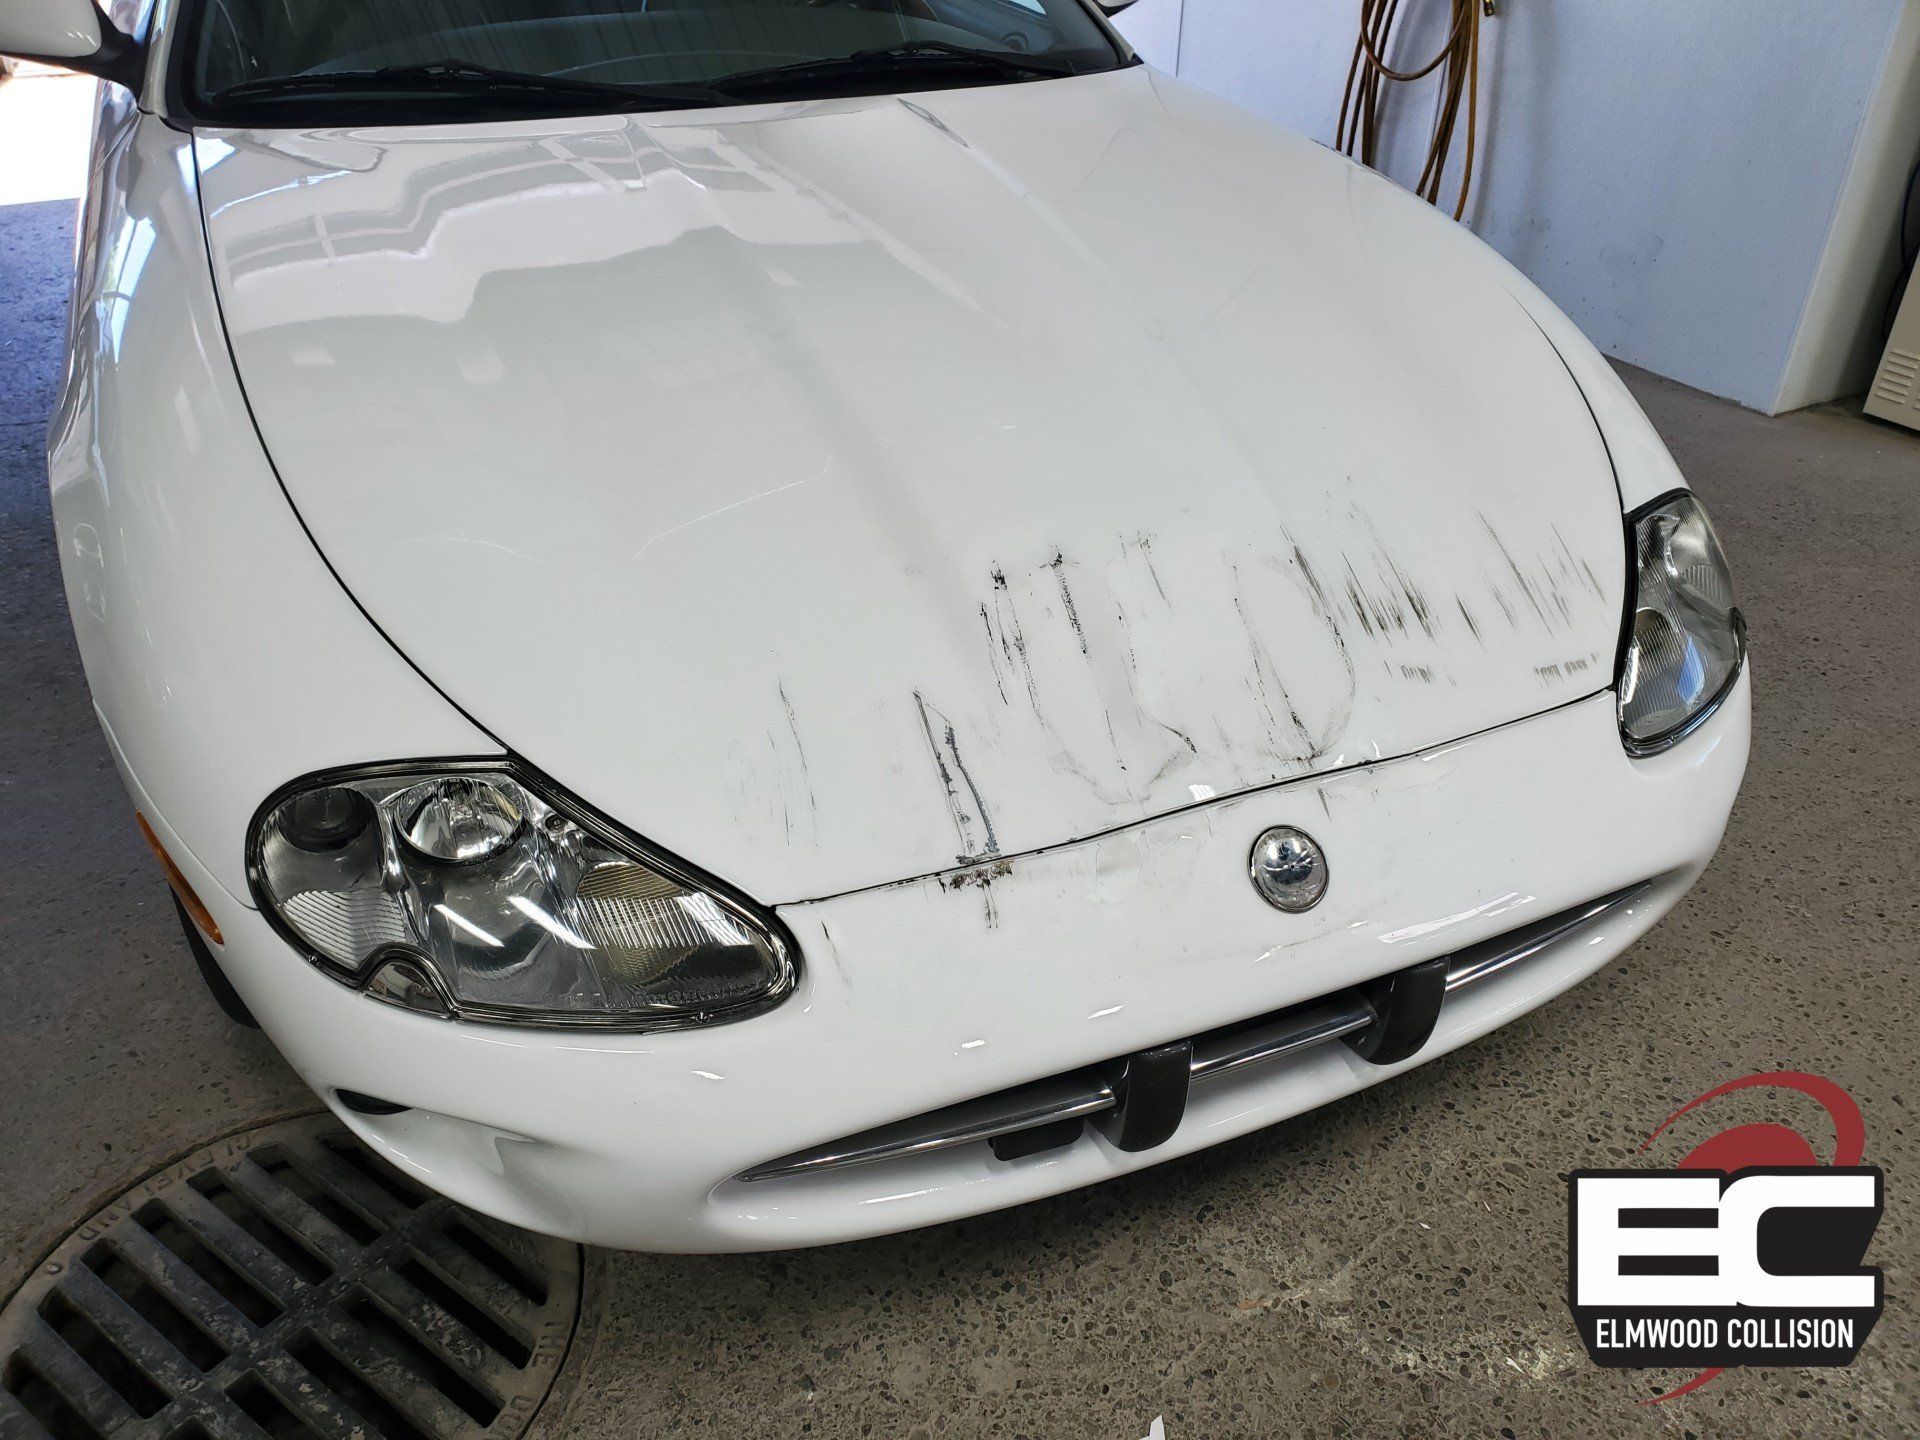 1998 Jaguar XK8 with damage to bumper and hood at Elmwood Collision in Kenmore New York